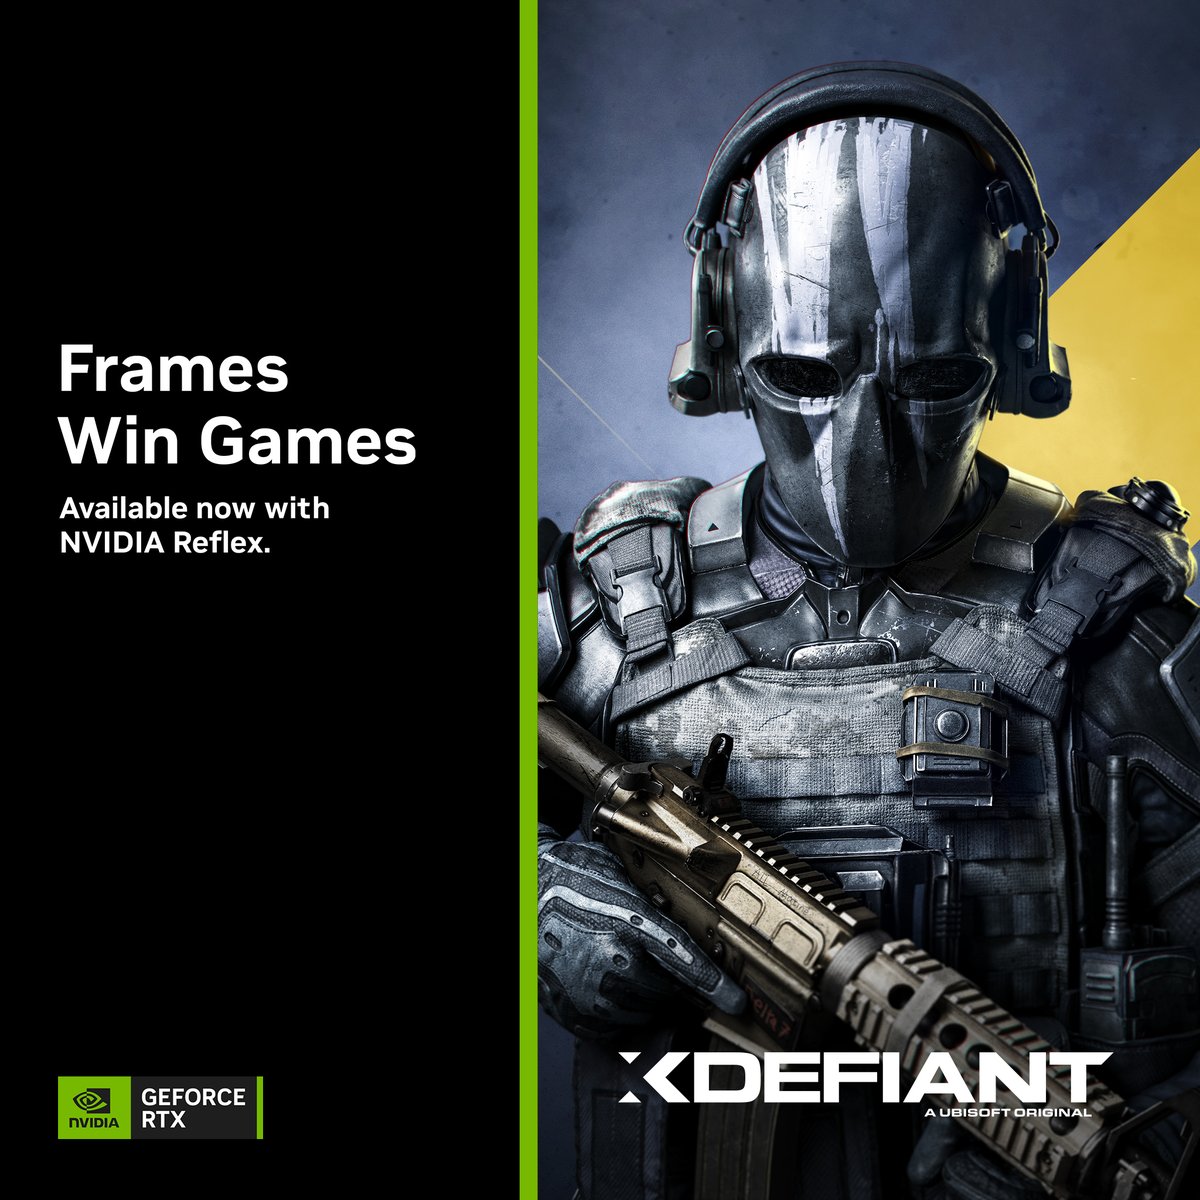 XDefiant is available today with NVIDIA Reflex reducing PC latency by up to 58% for more responsive gaming. #FramesWinGames 🎯 nvidia.com/en-us/geforce/…